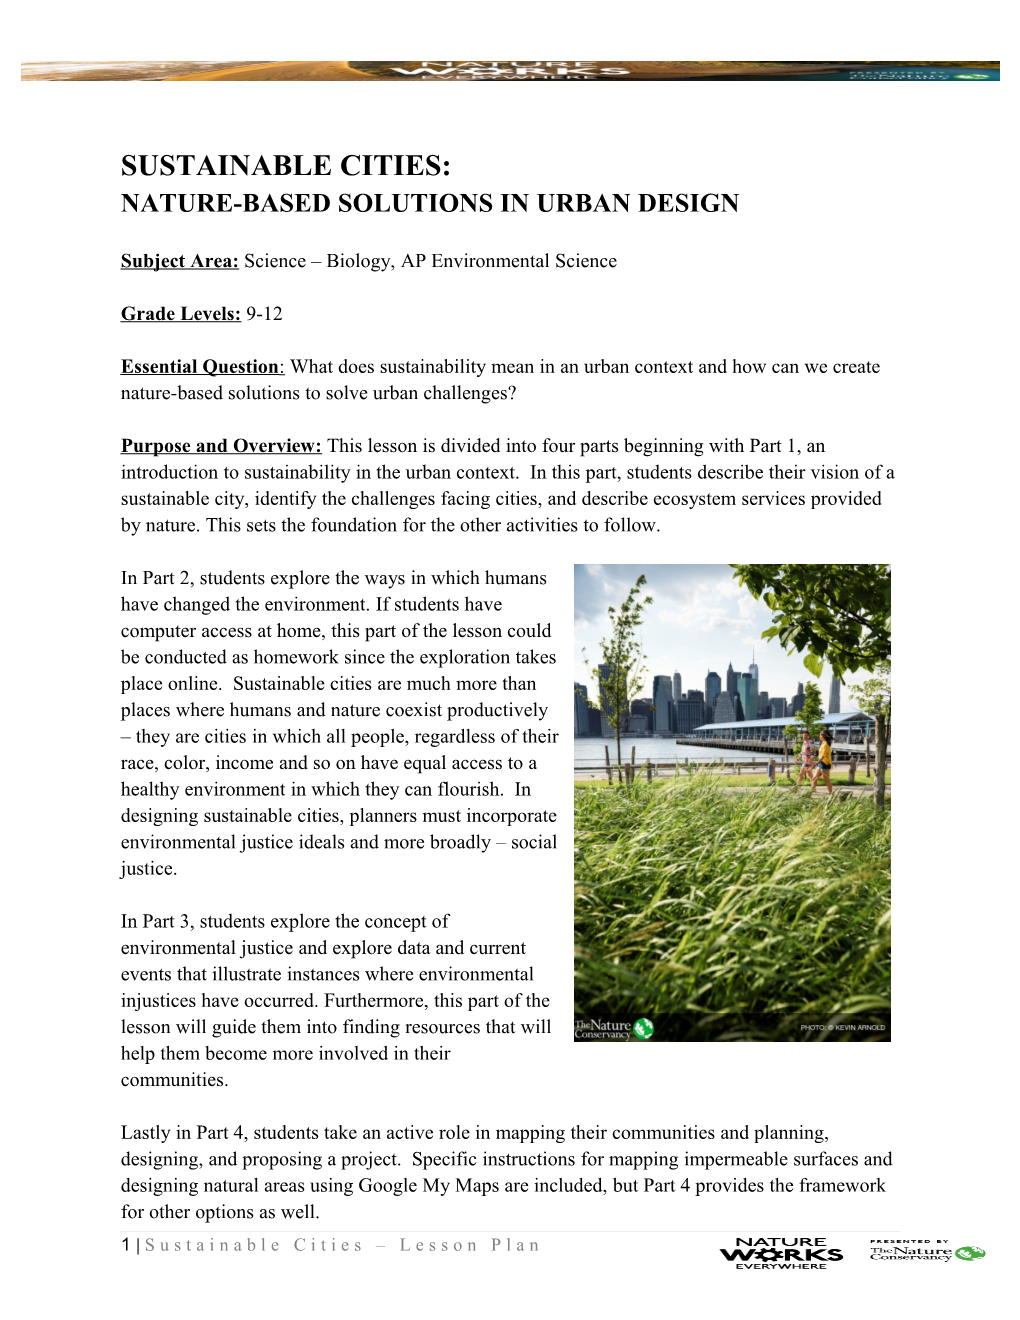 Nature-Based Solutions in Urban Design